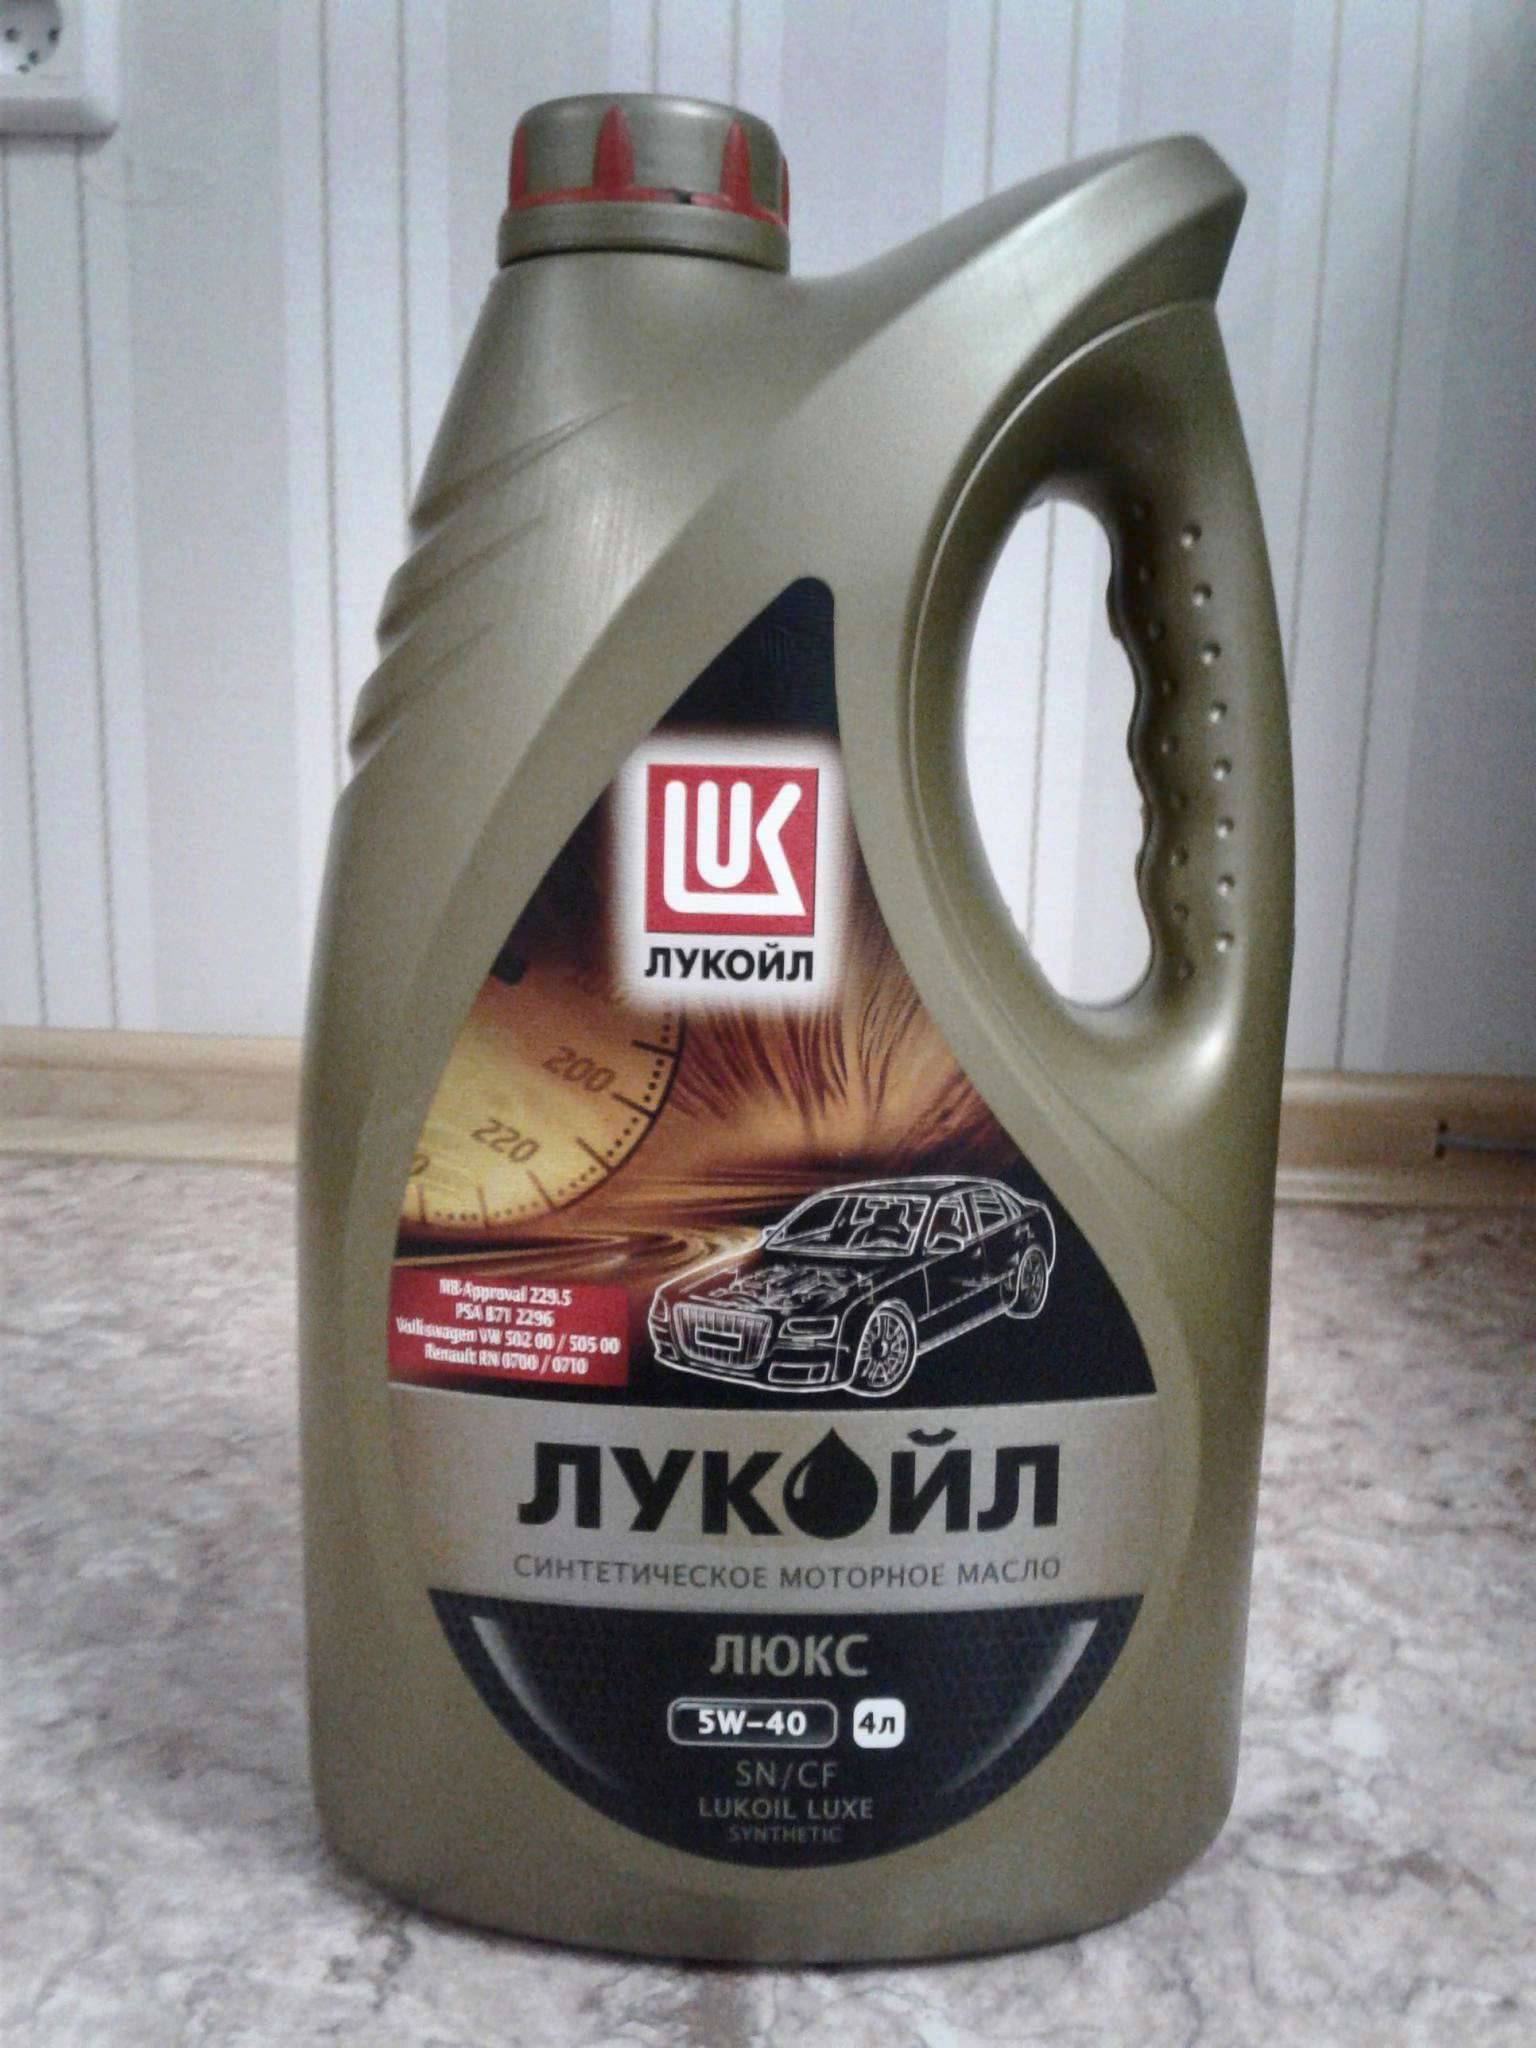 Моторное масло лукойл люкс 5w 40. Lukoil Luxe 5w-40. Лукойл Люкс 5w40 SN/CF. Лукойл Люкс 5w40 SN/CF 4л. SN/CF 5w-40 Lukoil.